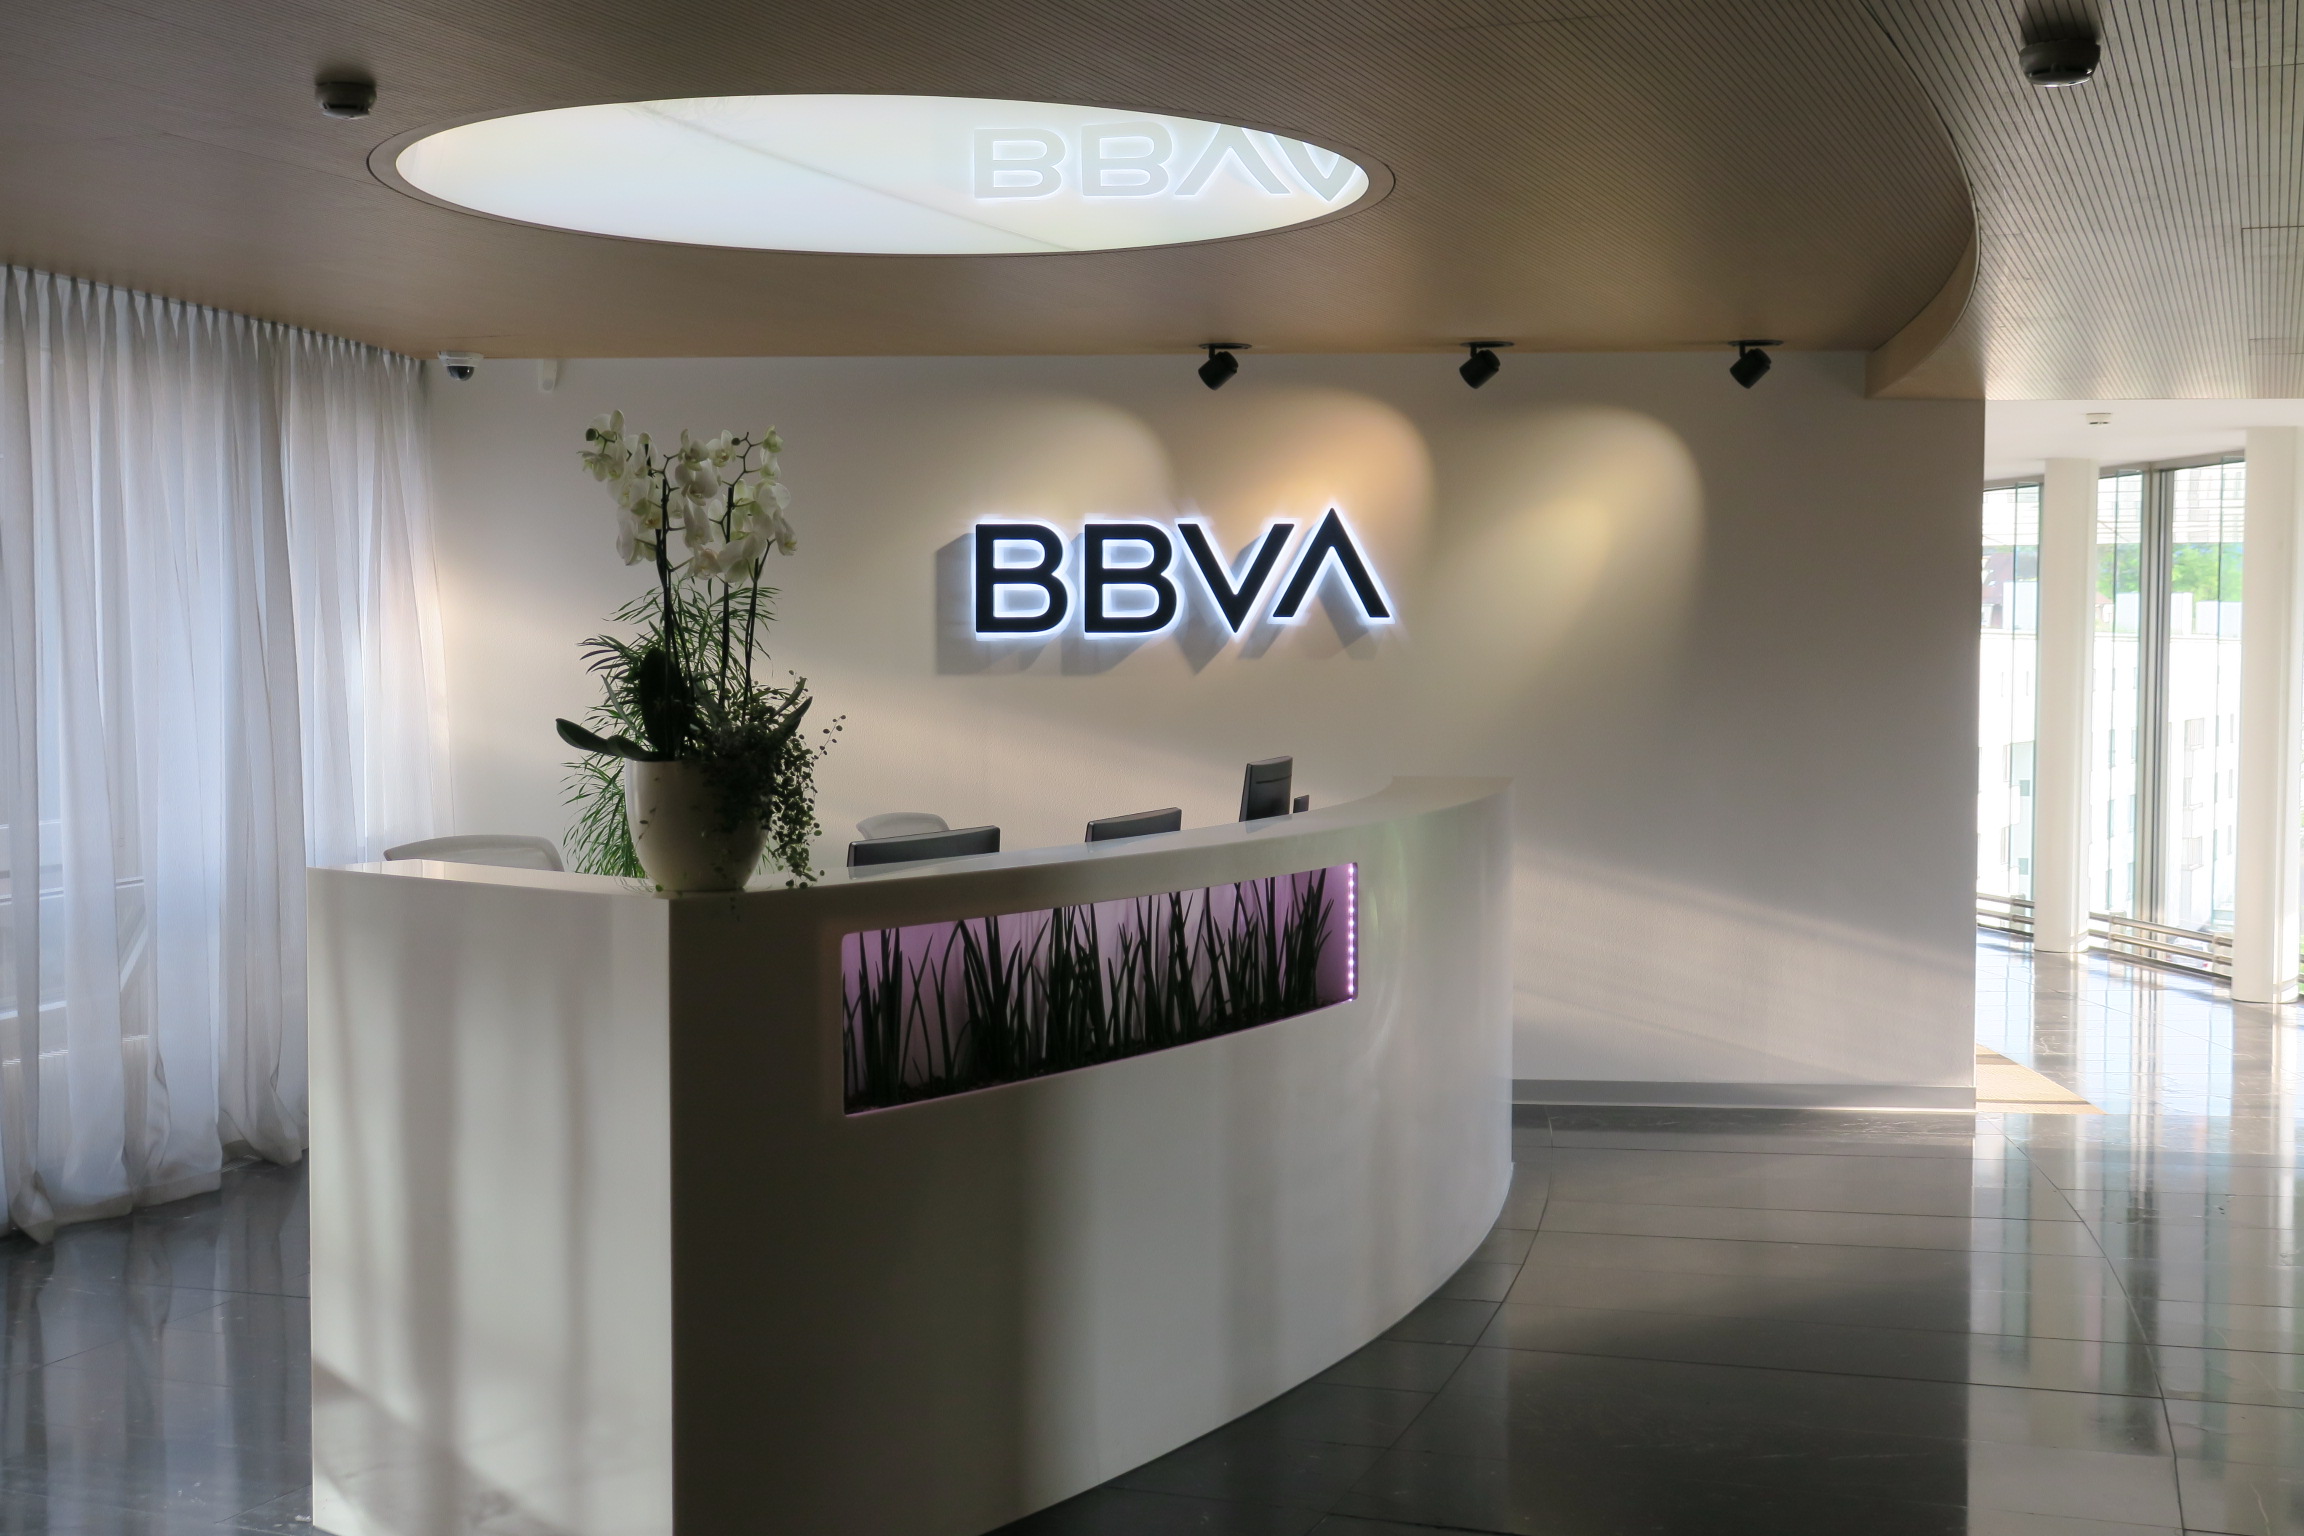 BBVA is participating in the fourth edition of the Swiss Private Banking awards 2019